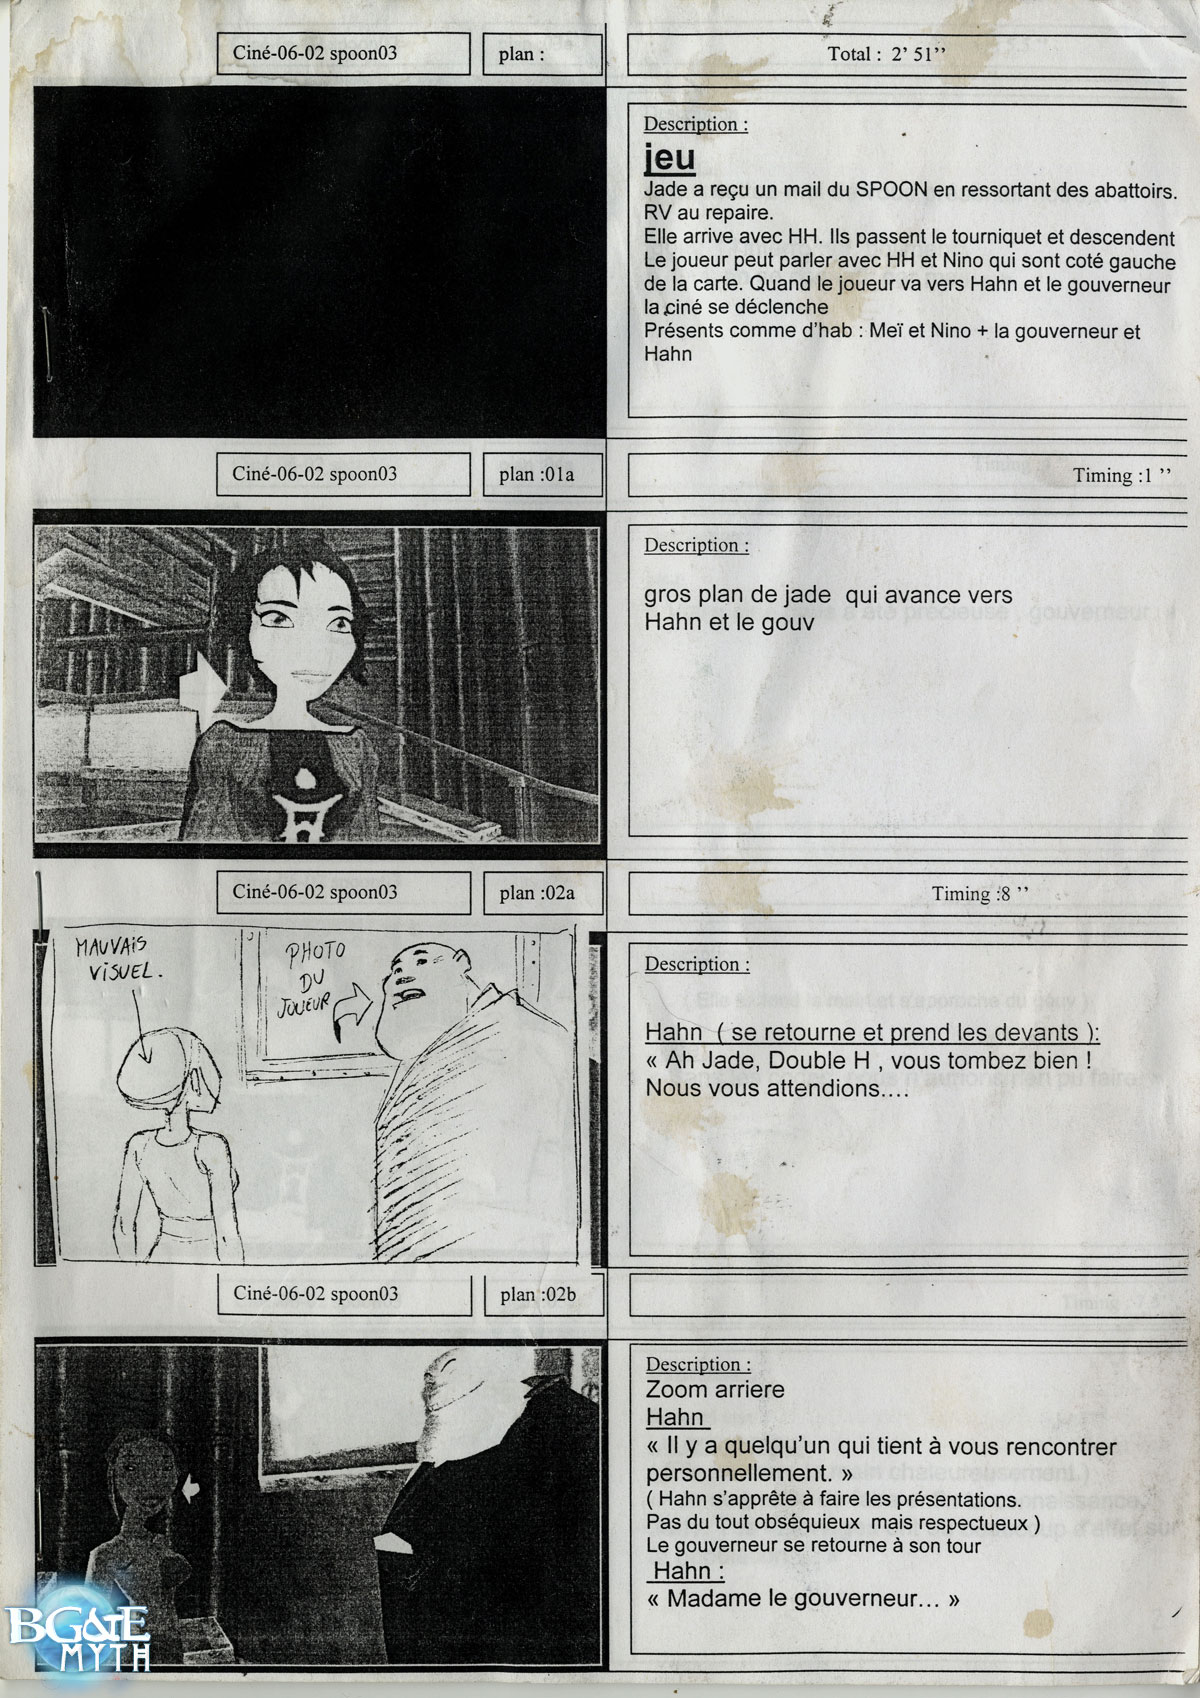 [Storyboard] Marcassin appelle IRIS - Page 1